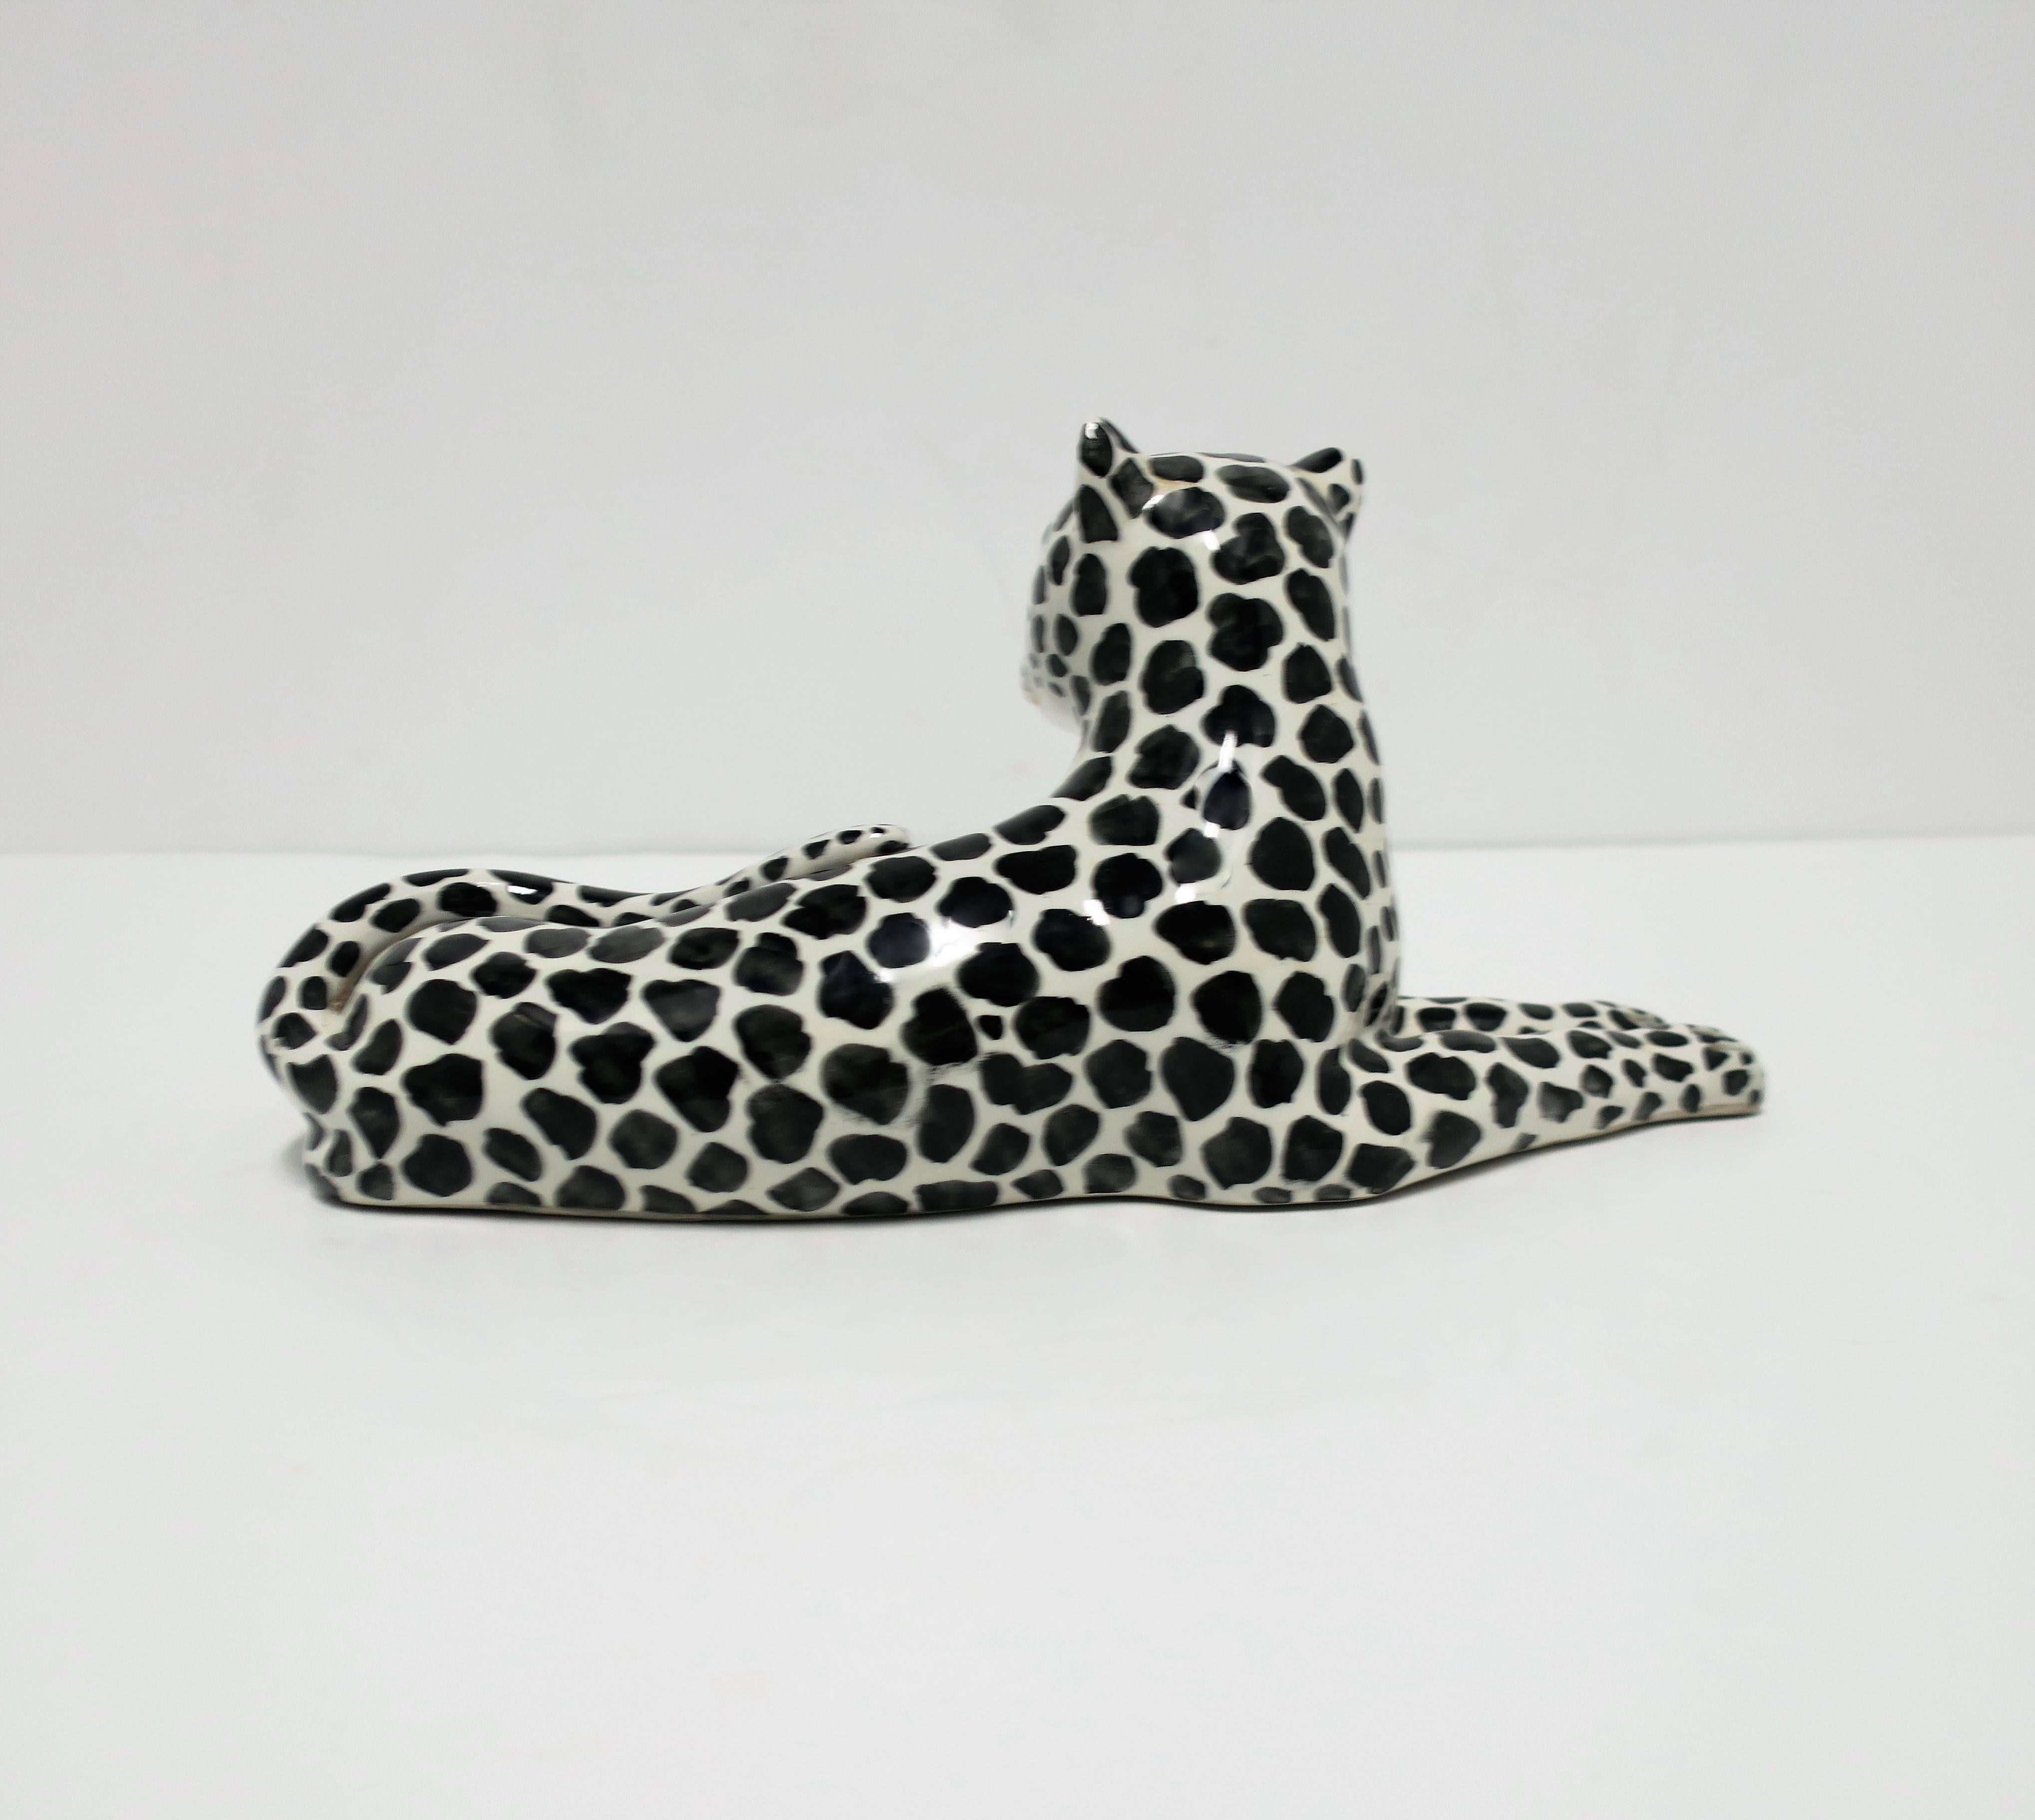 Late 20th Century Italian Black and White Cheetah or Leopard Cat Sculpture